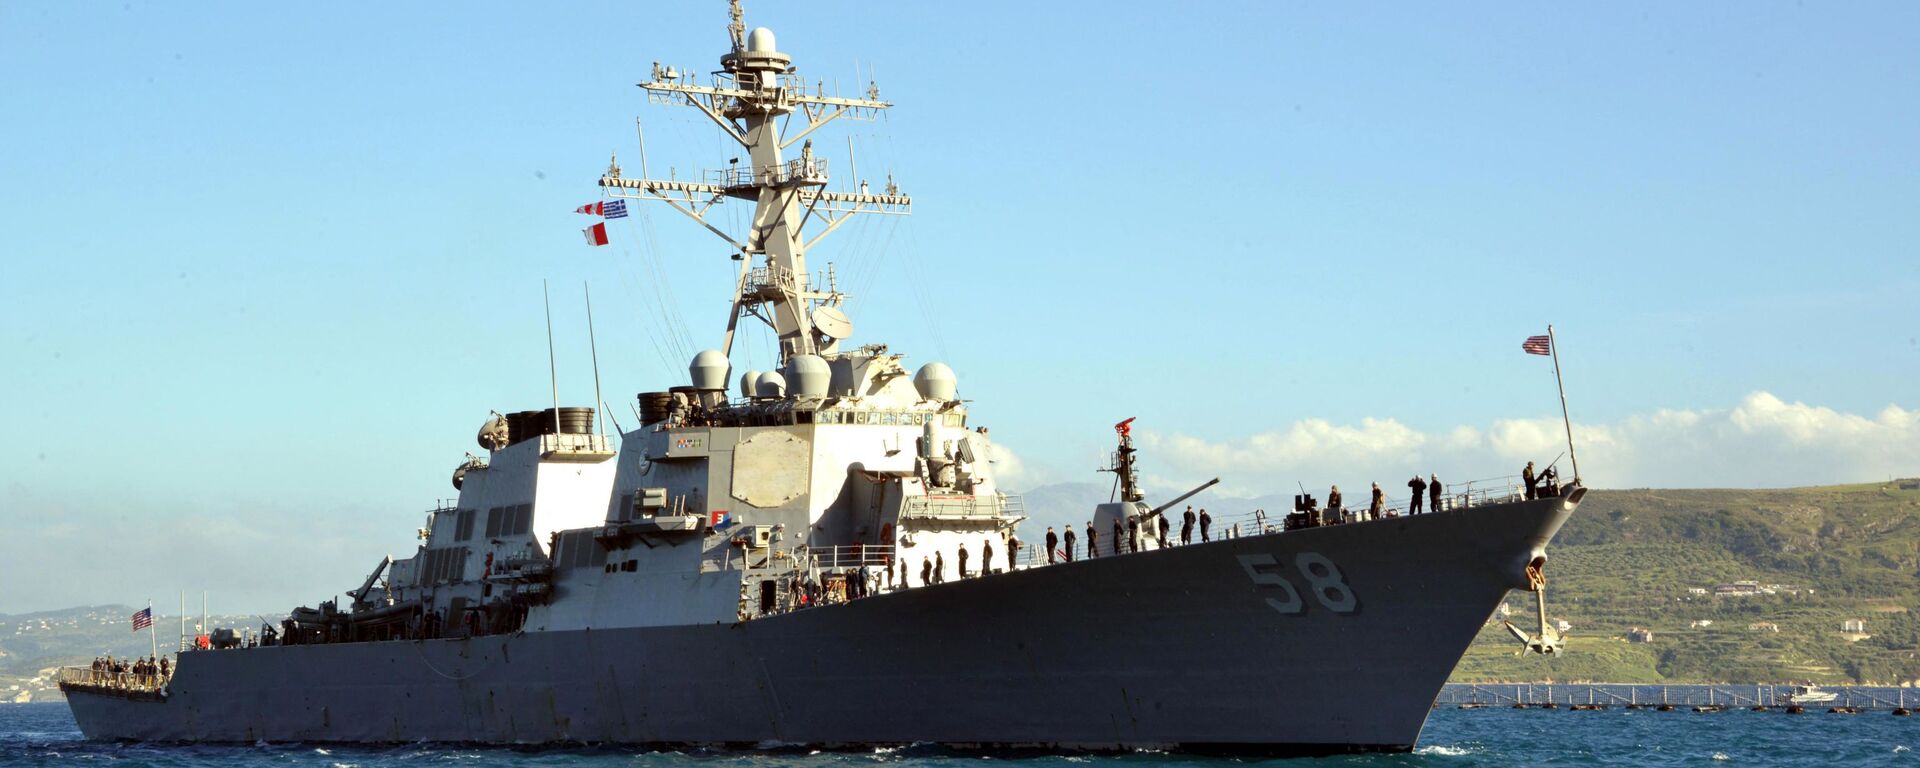 In this April 29, 2015 US Navy handout photo, the guided-missile destroyer USS Laboon (DDG 58) arrives in Souda Bay, Greece on April 29, 2015 for a scheduled port visit.  - Sputnik International, 1920, 15.01.2024